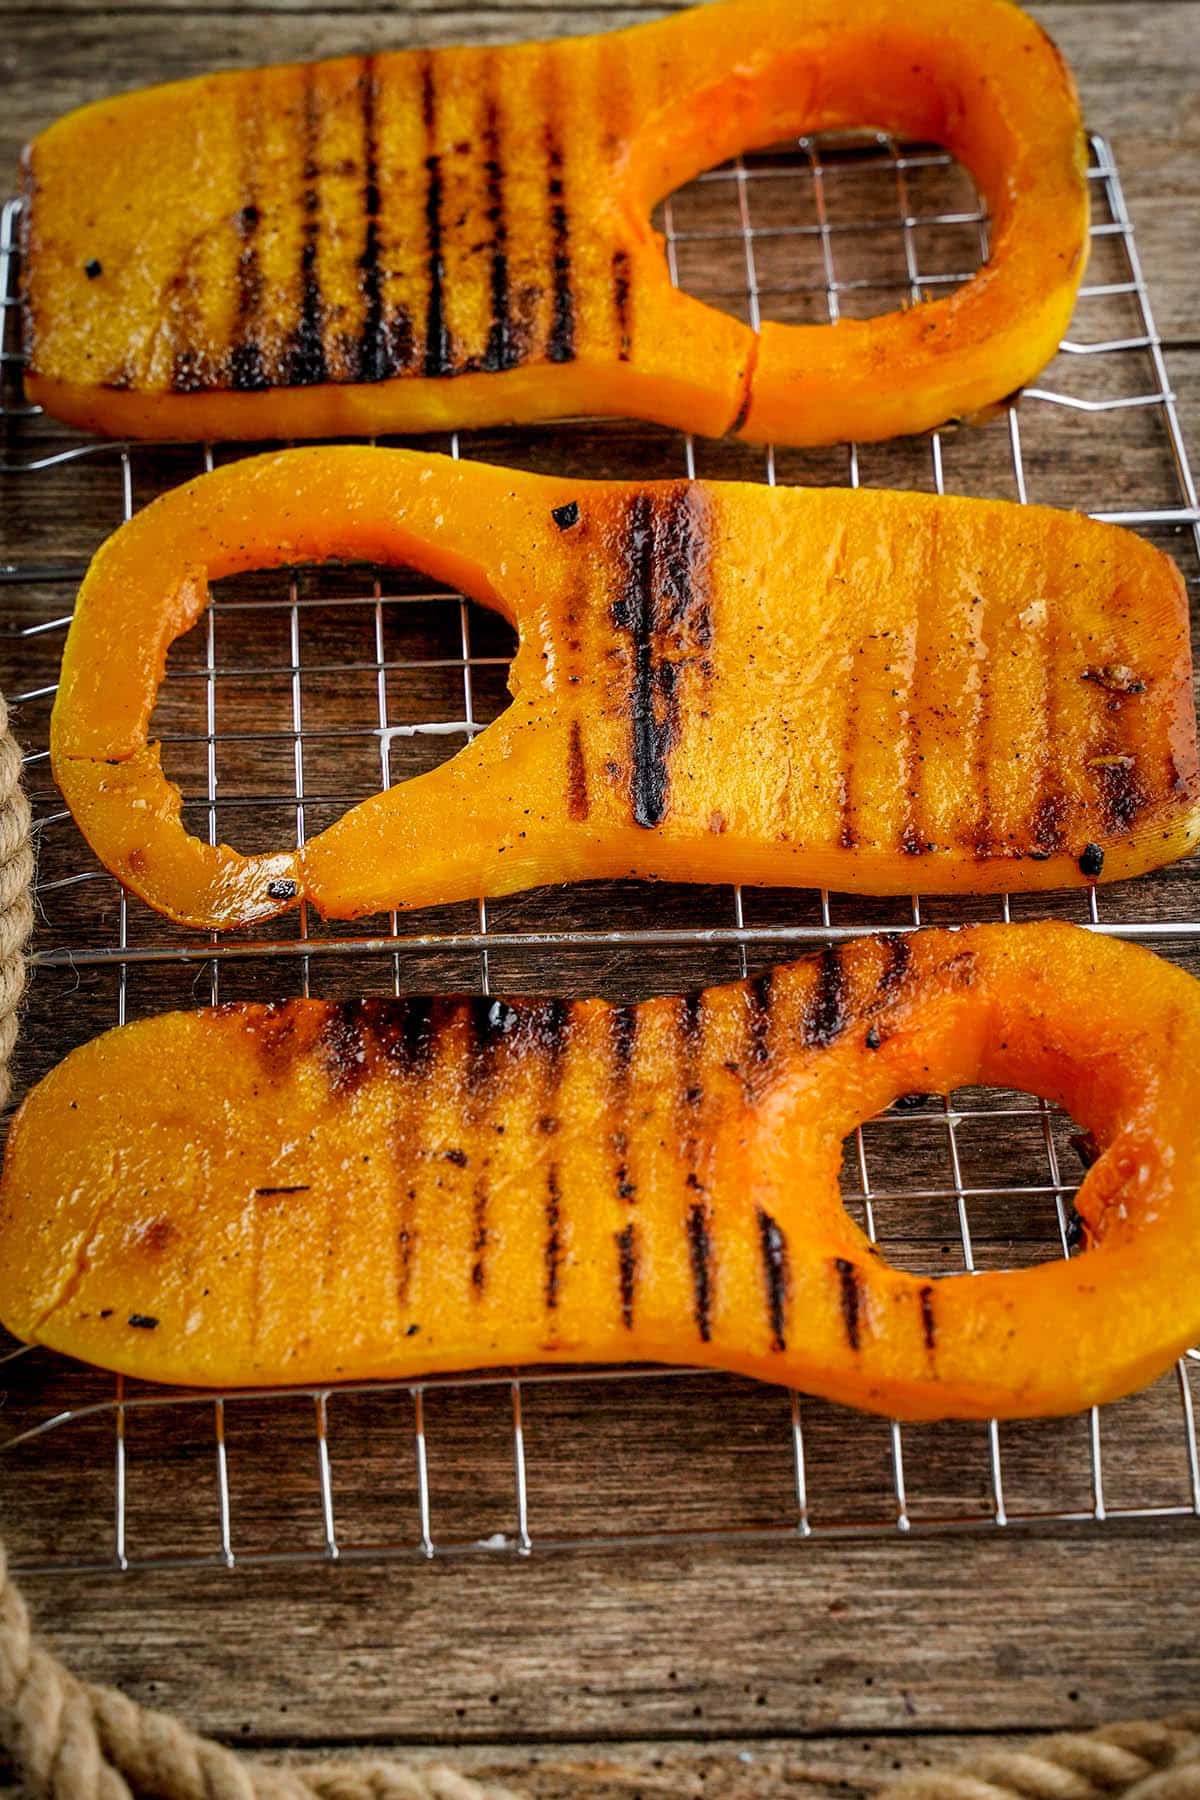 picnic side dish of grilled squash